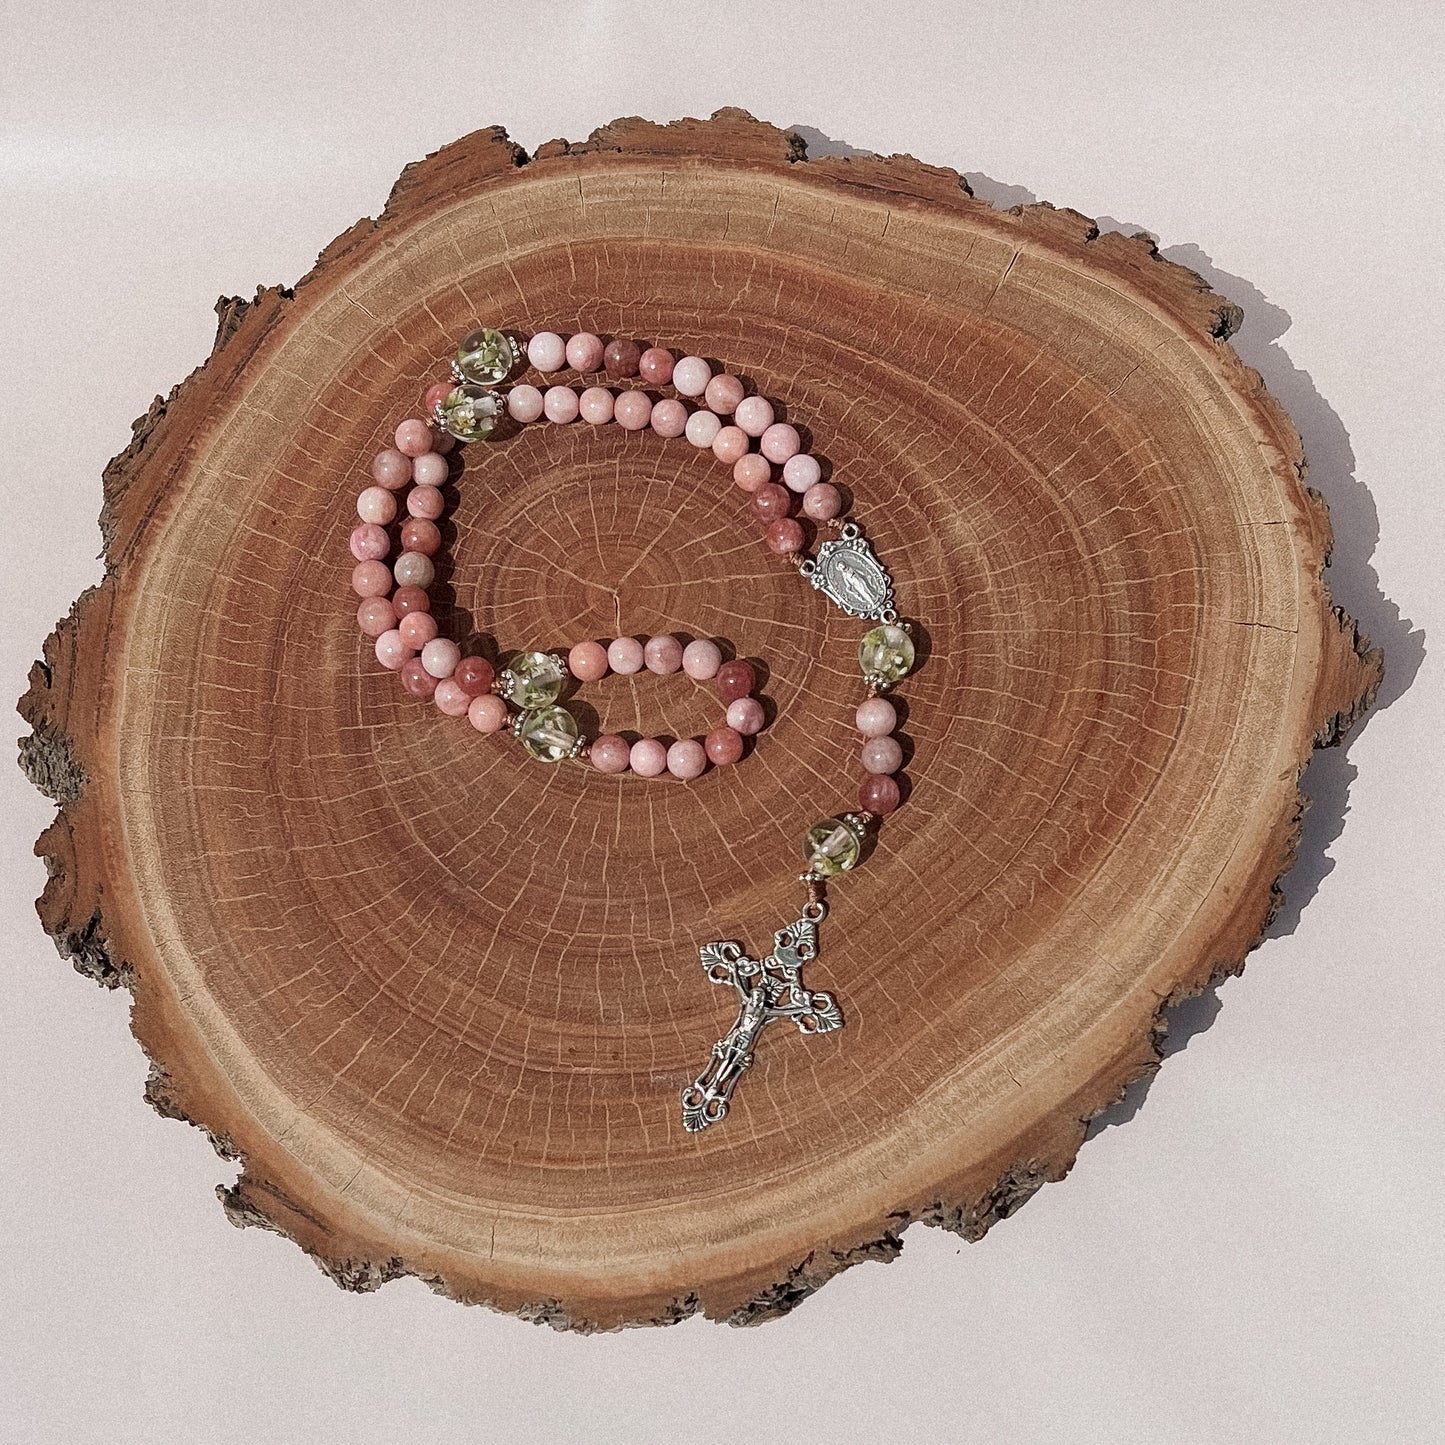 Australian Flower Series Rosary - Inspired by Mother Mary (Pink)